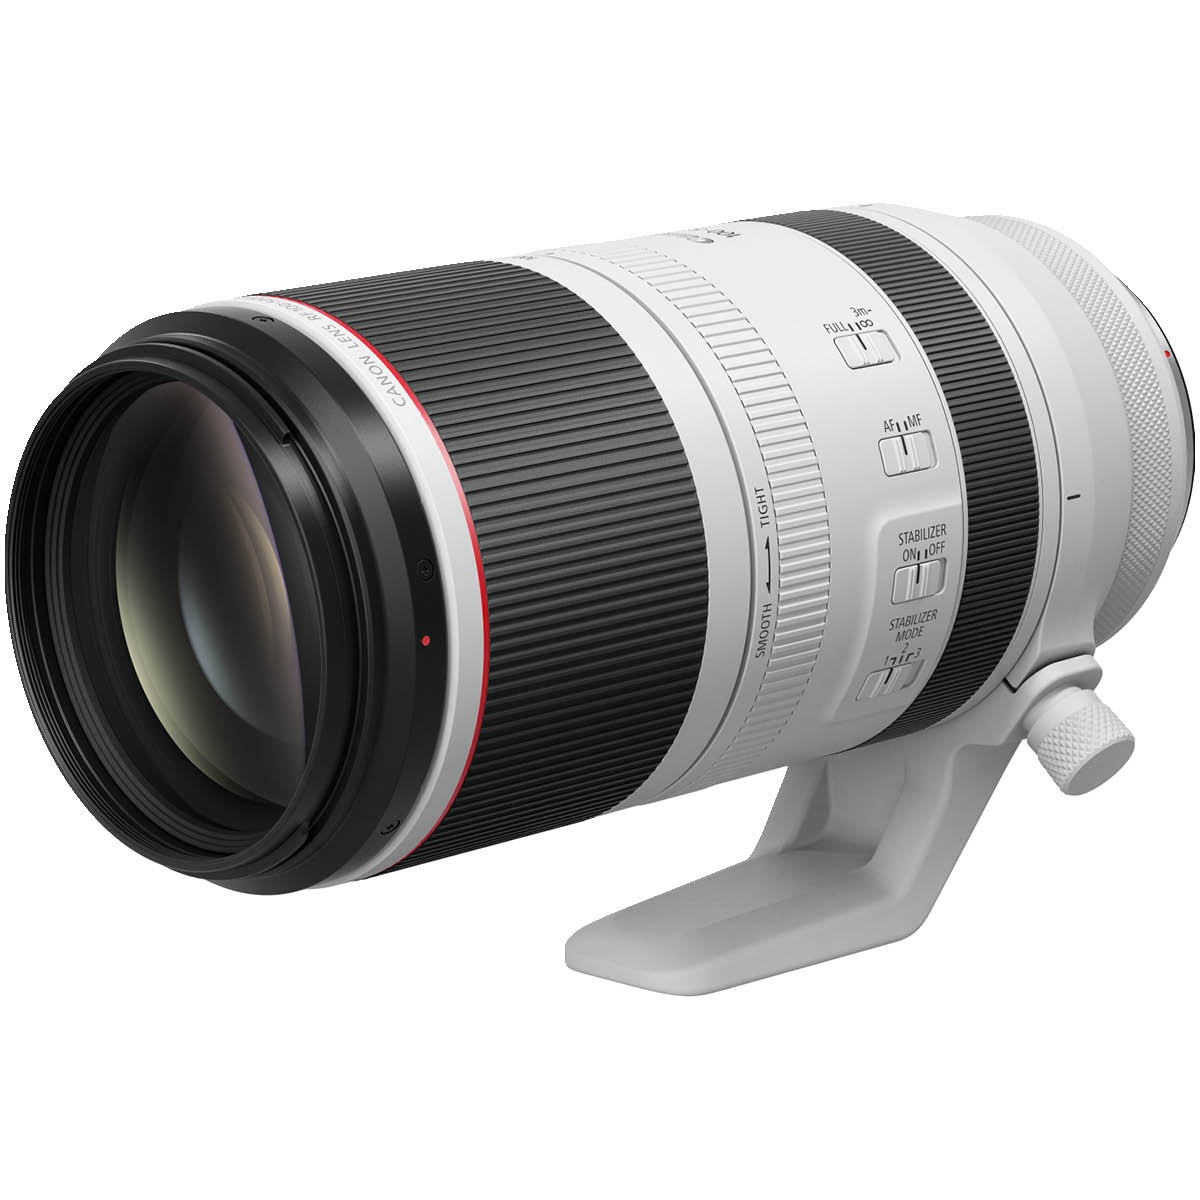 Canon RF 100-500 mm 1: 4.5-7.1 L IS USM